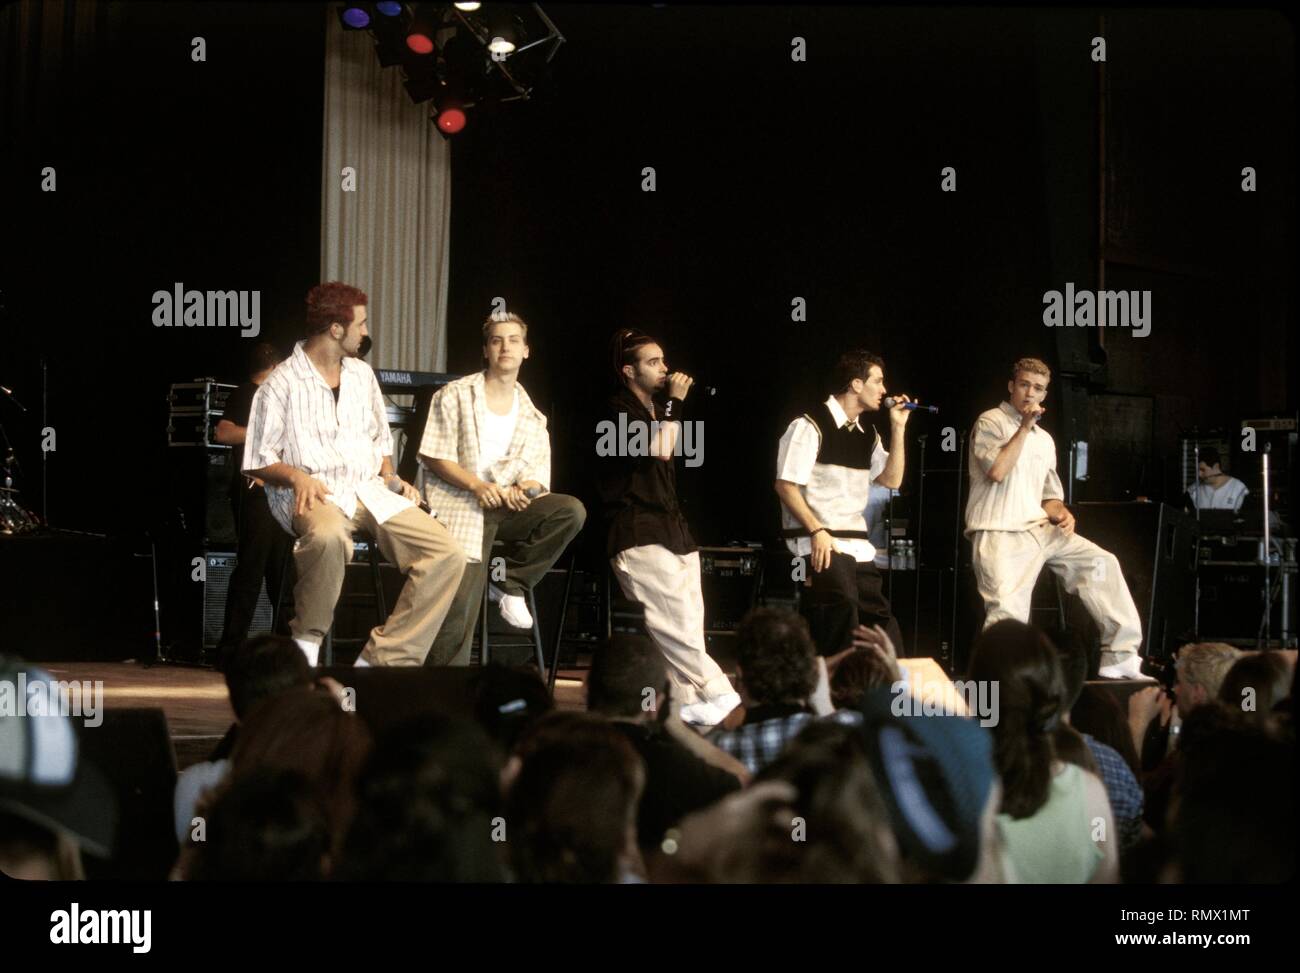 The pop group 'N Sync  is shown performing on stage during a 'live' concert appearance. Stock Photo